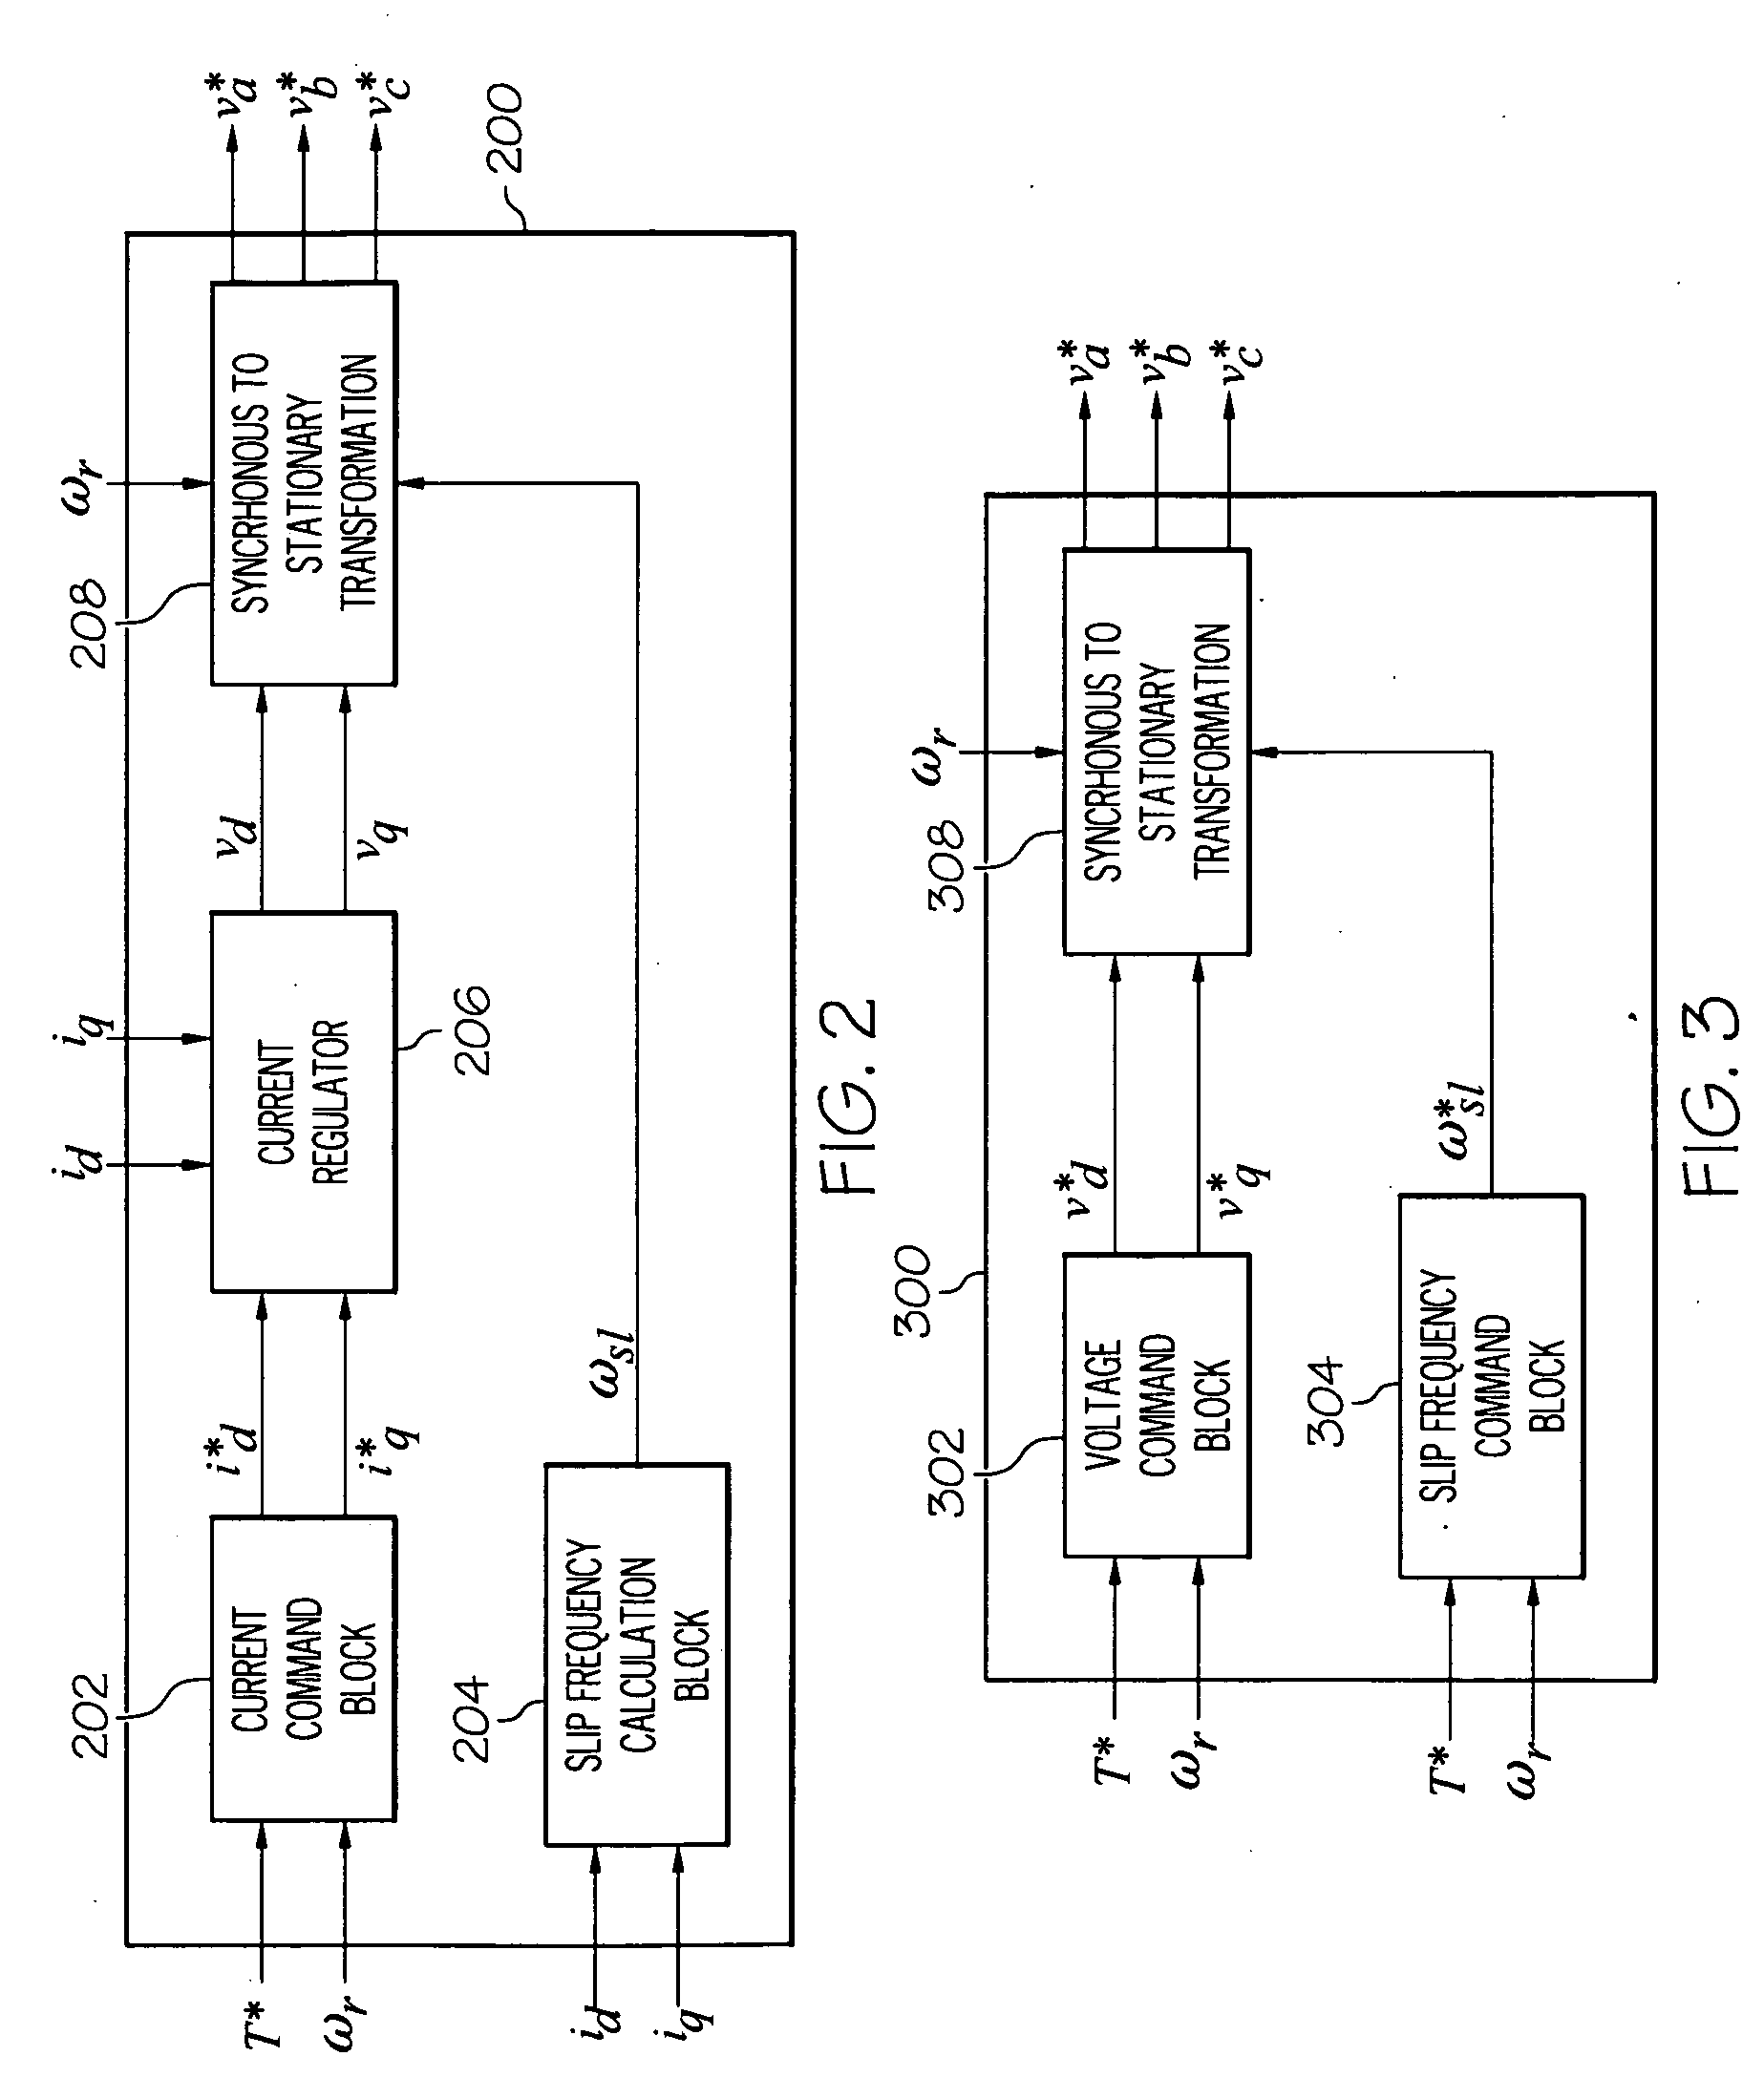 Torque production in an electric motor in response to current sensor error